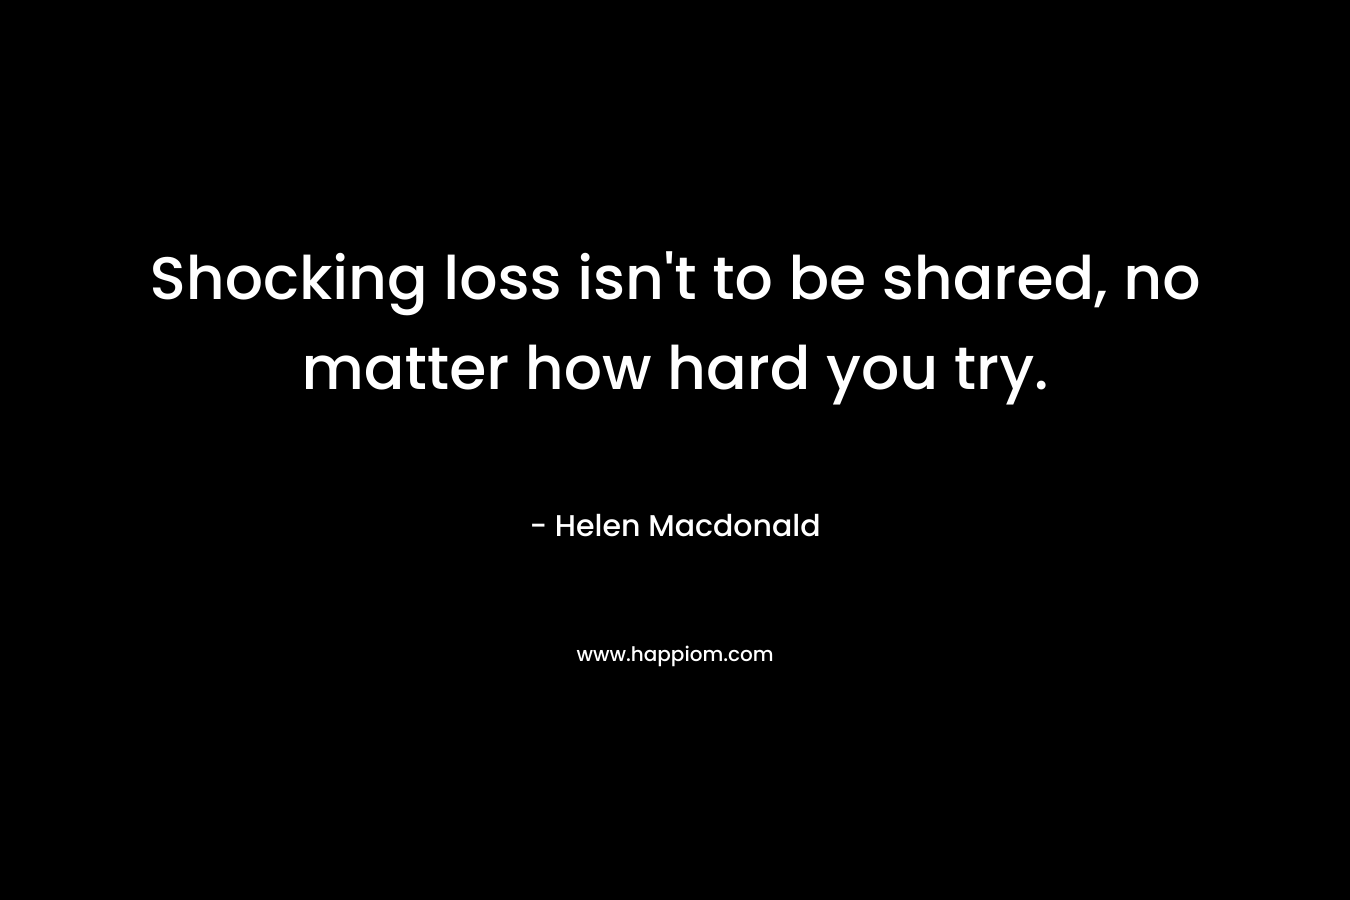 Shocking loss isn't to be shared, no matter how hard you try.